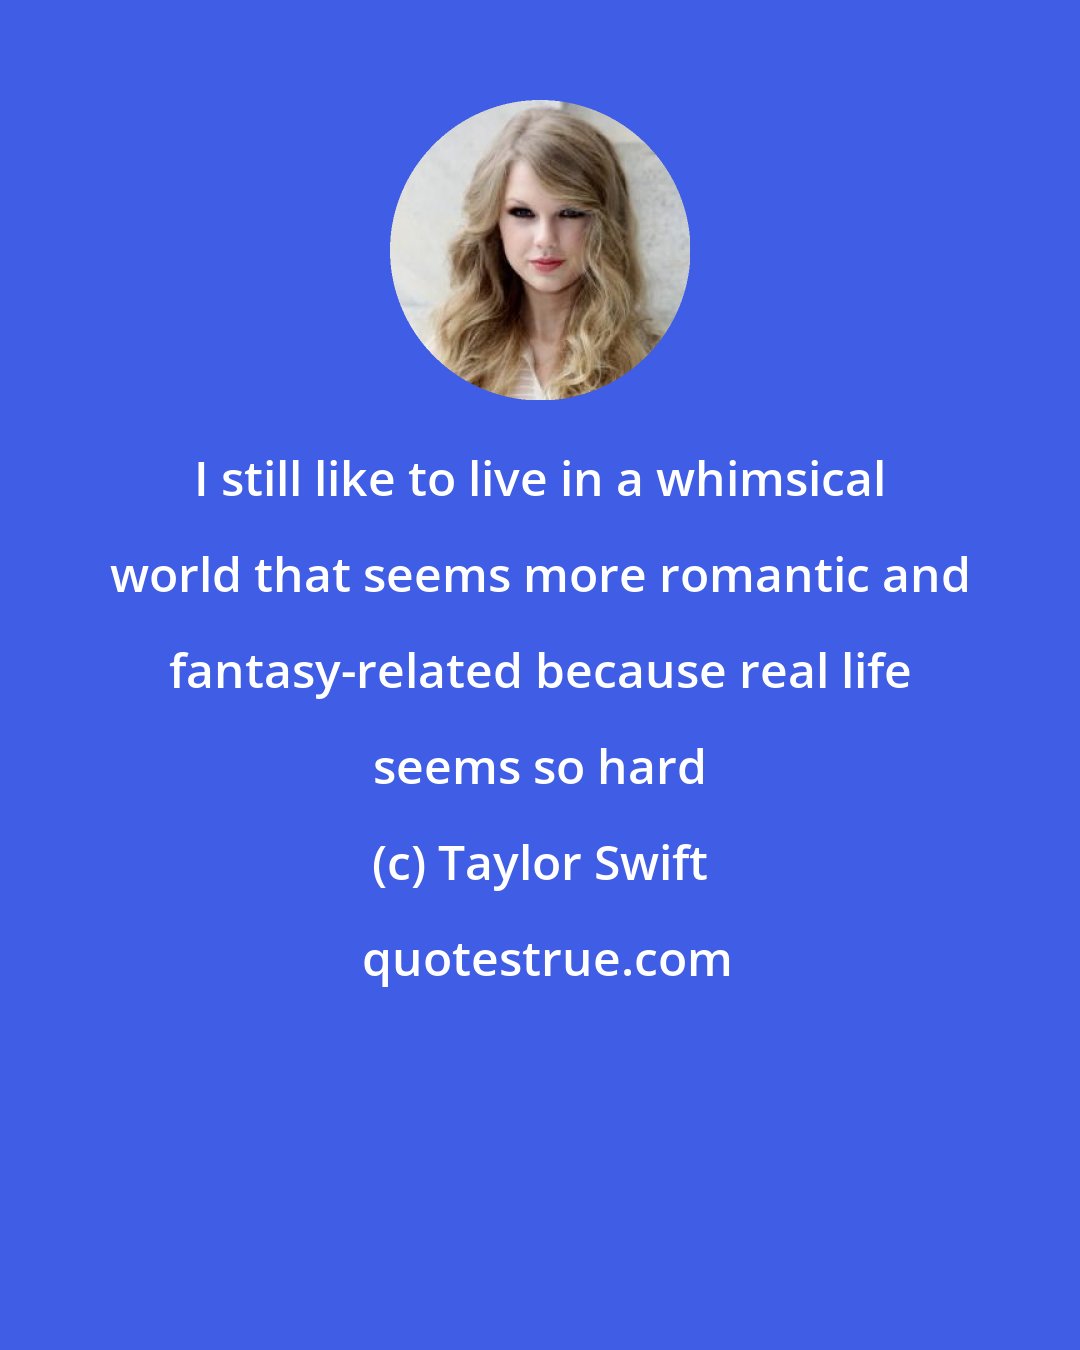 Taylor Swift: I still like to live in a whimsical world that seems more romantic and fantasy-related because real life seems so hard